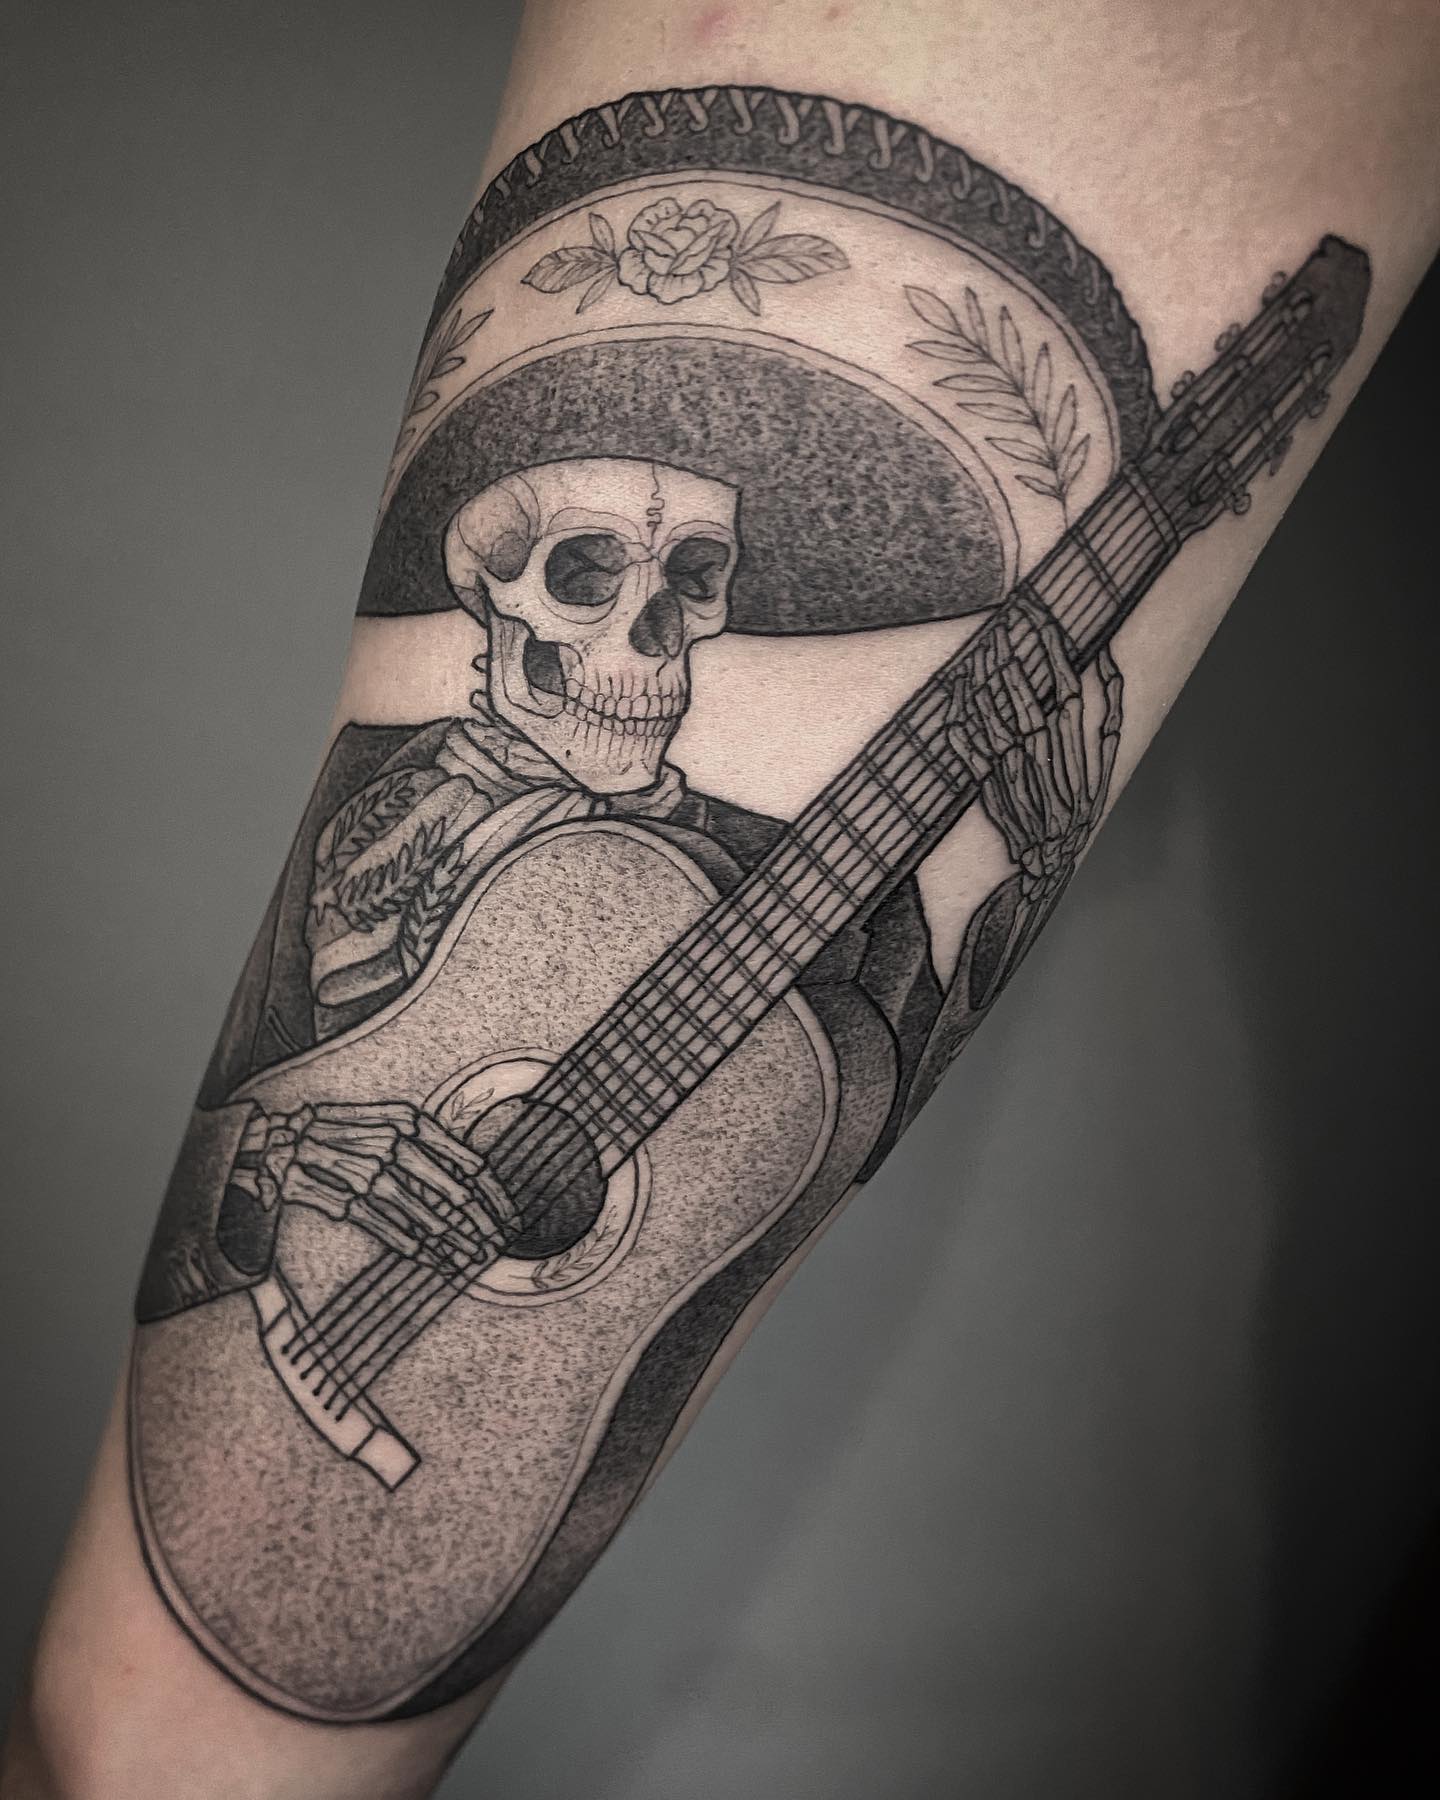 Here is a fun and interesting tattoo for those who are a fan of Mexican traditions.